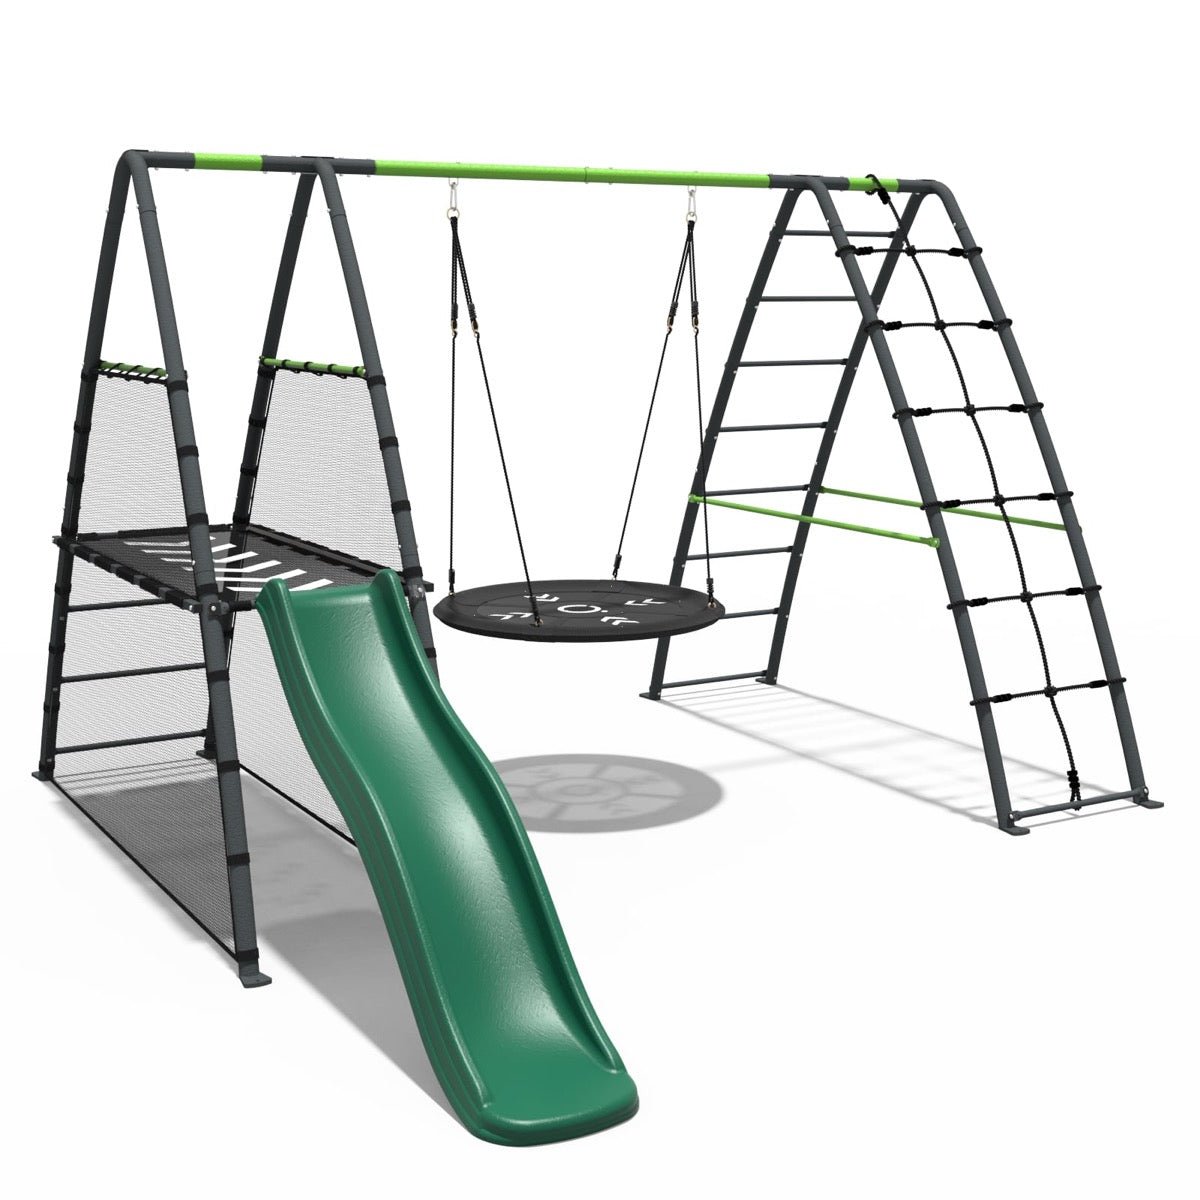 Rebo Steel Series Metal Swing Set + Up and Over wall & 6ft Slide - Nest Green